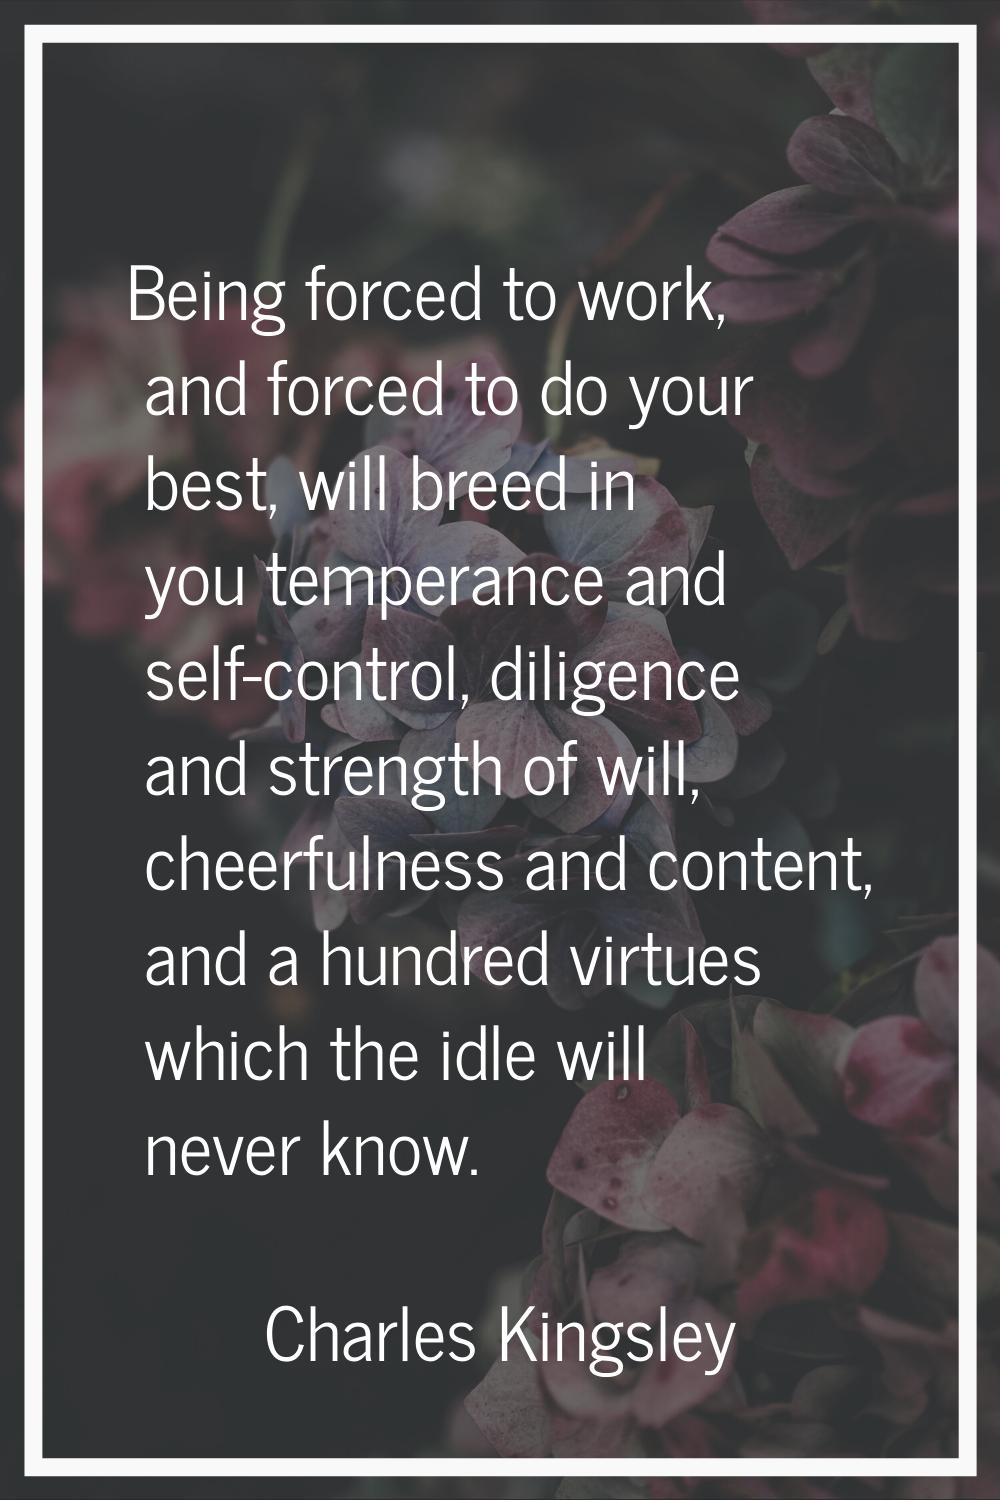 Being forced to work, and forced to do your best, will breed in you temperance and self-control, di